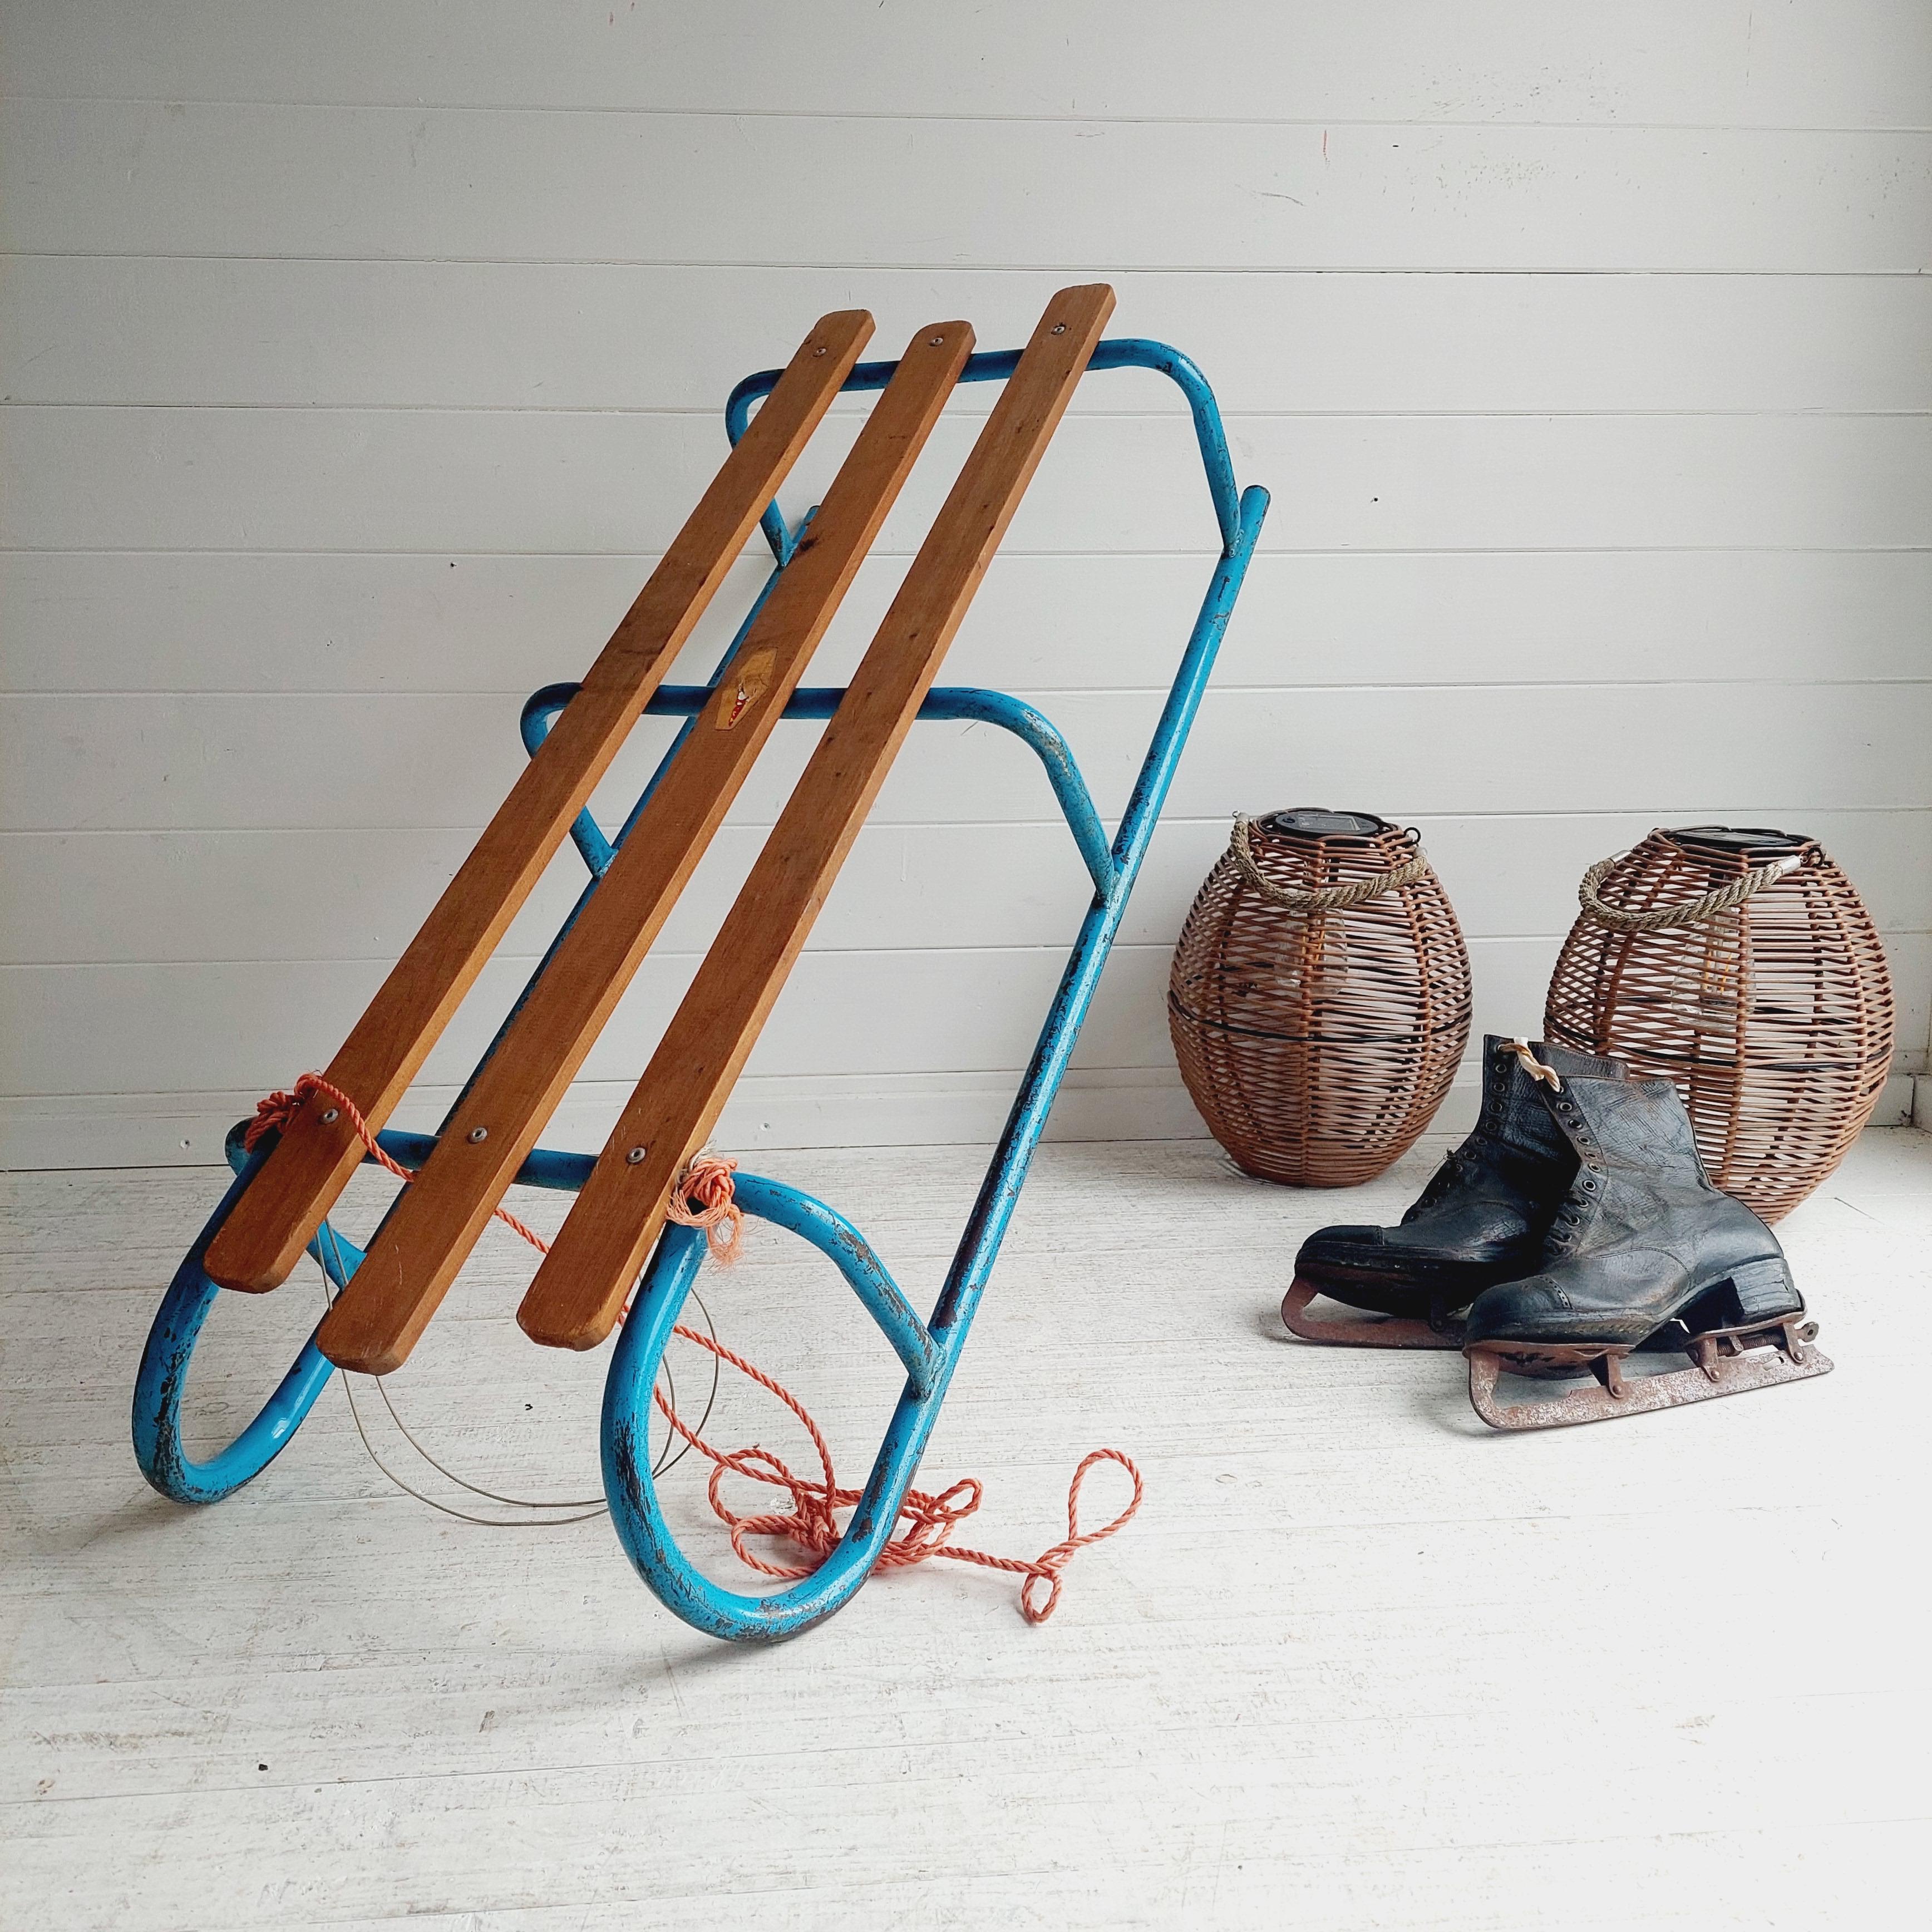 The classics are definitely the best and this wooden slatted sledge is no exception. 

This sledge would make for a great prop or decorative piece this winter and all year along.
Vibrant Blue steel metal frame with wooden slats.
Manufactured by Play